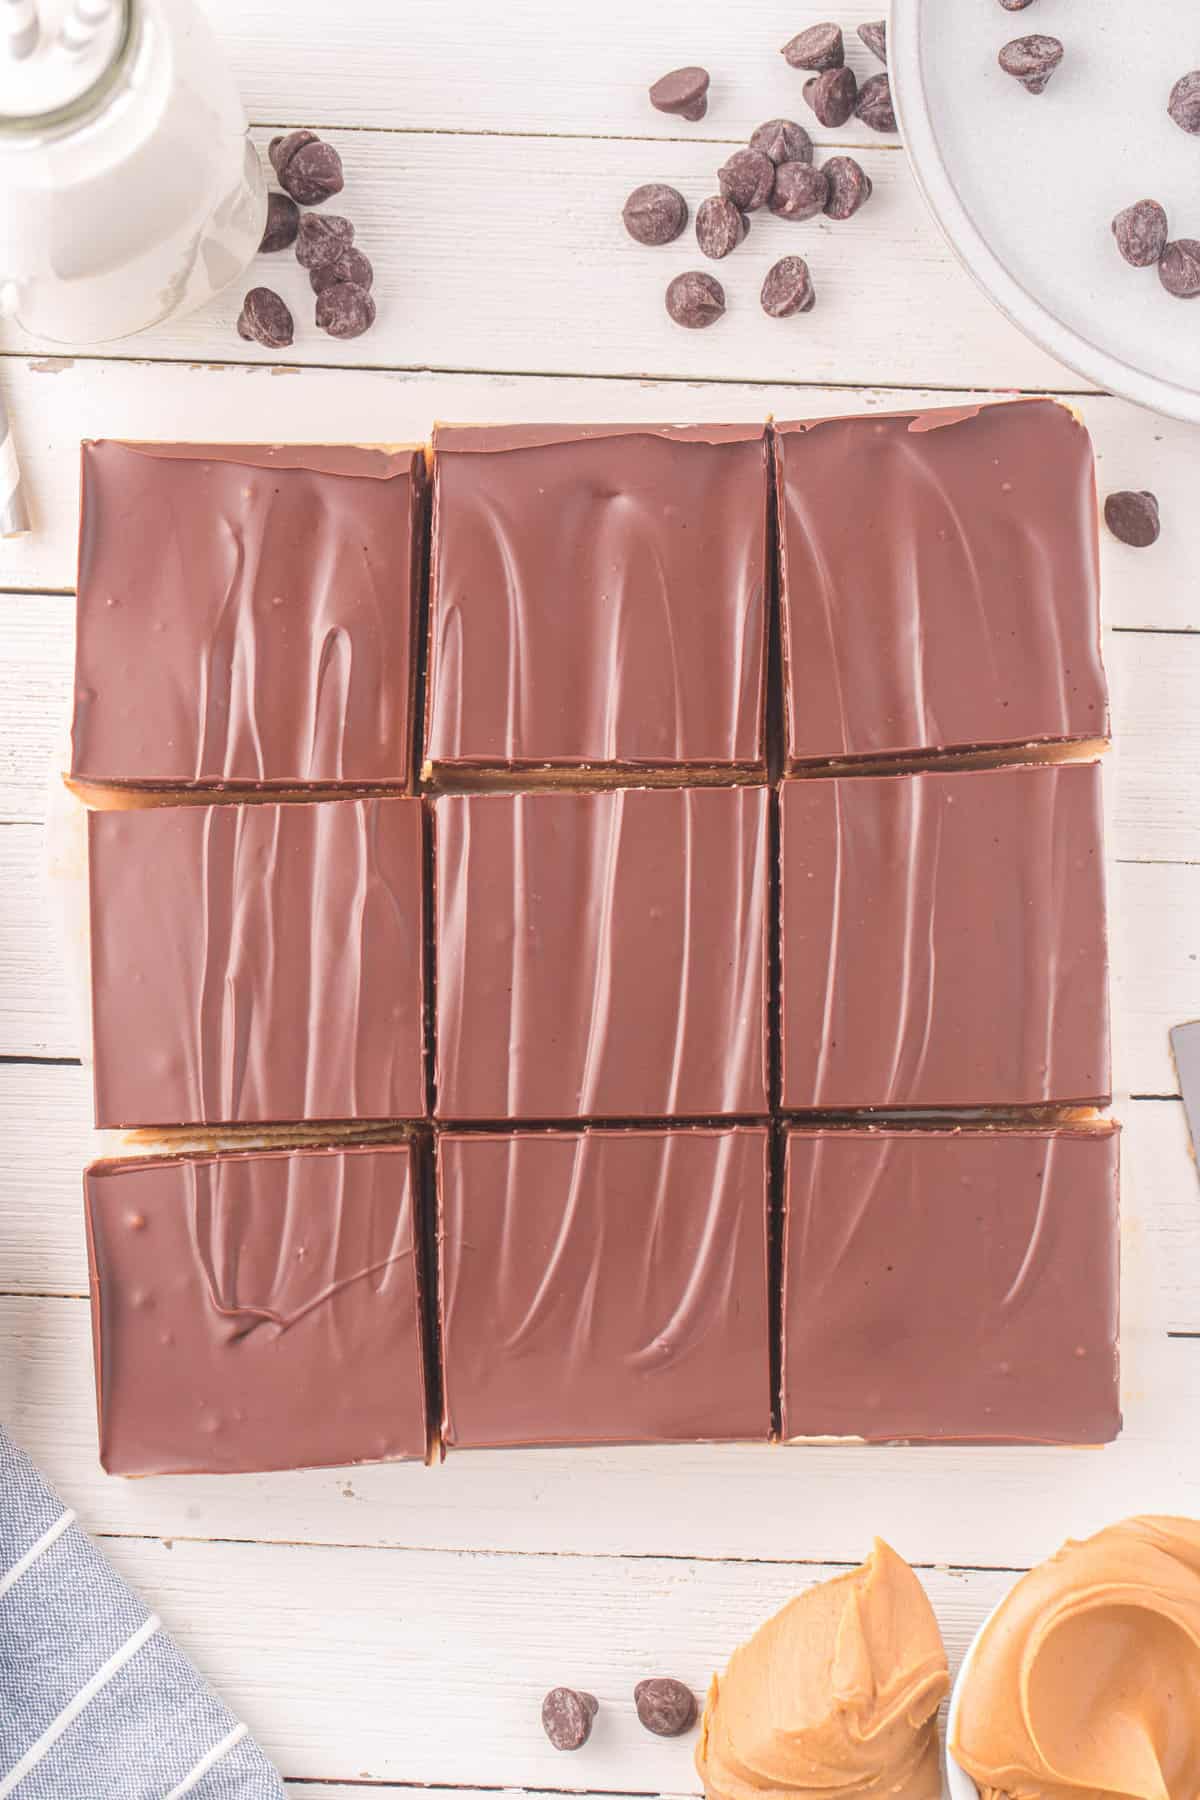 Cutting Chocolate Peanut Butter Bars into Squares